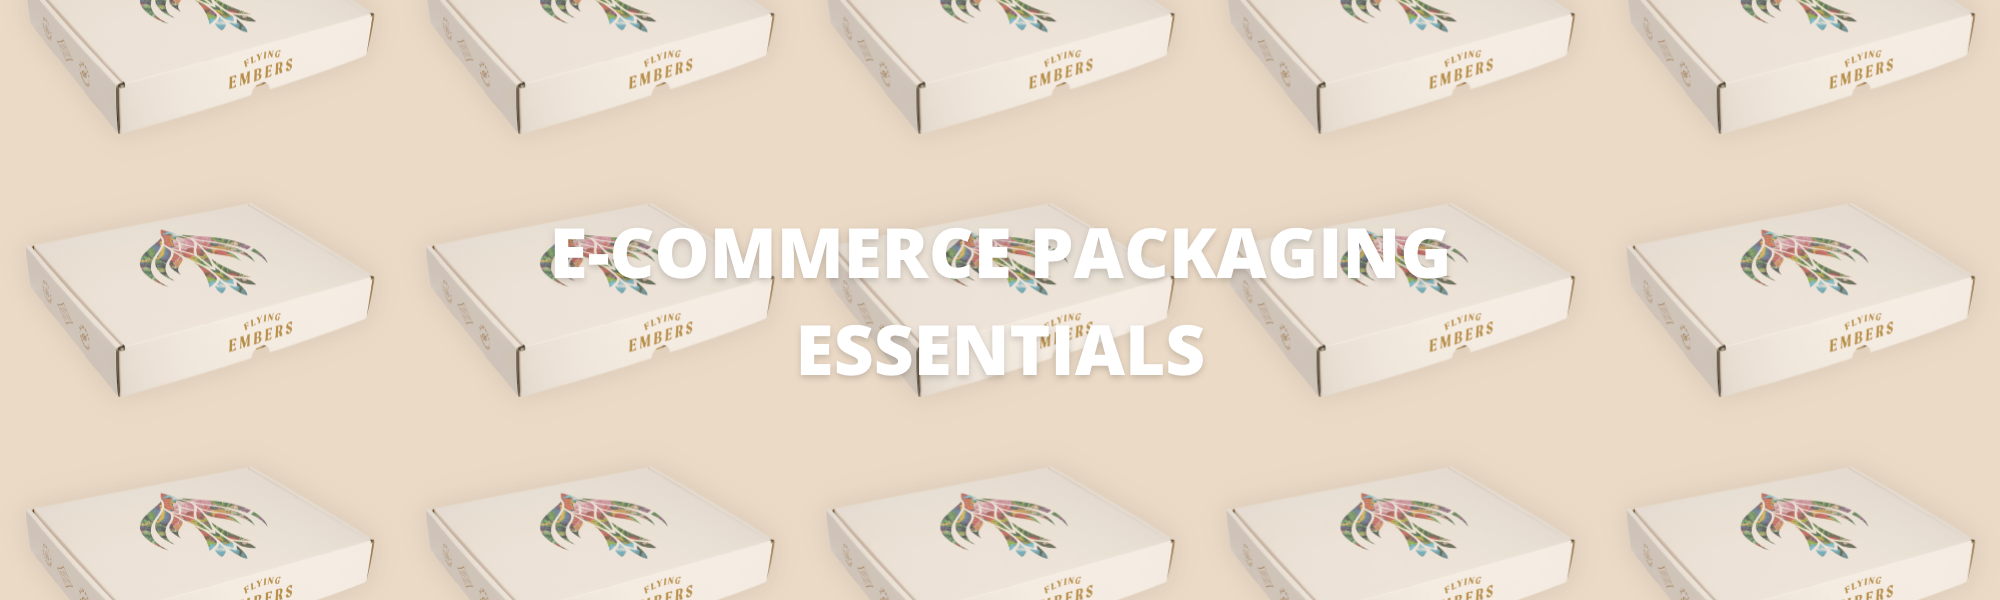 Ecommerce Site Banner Image.png